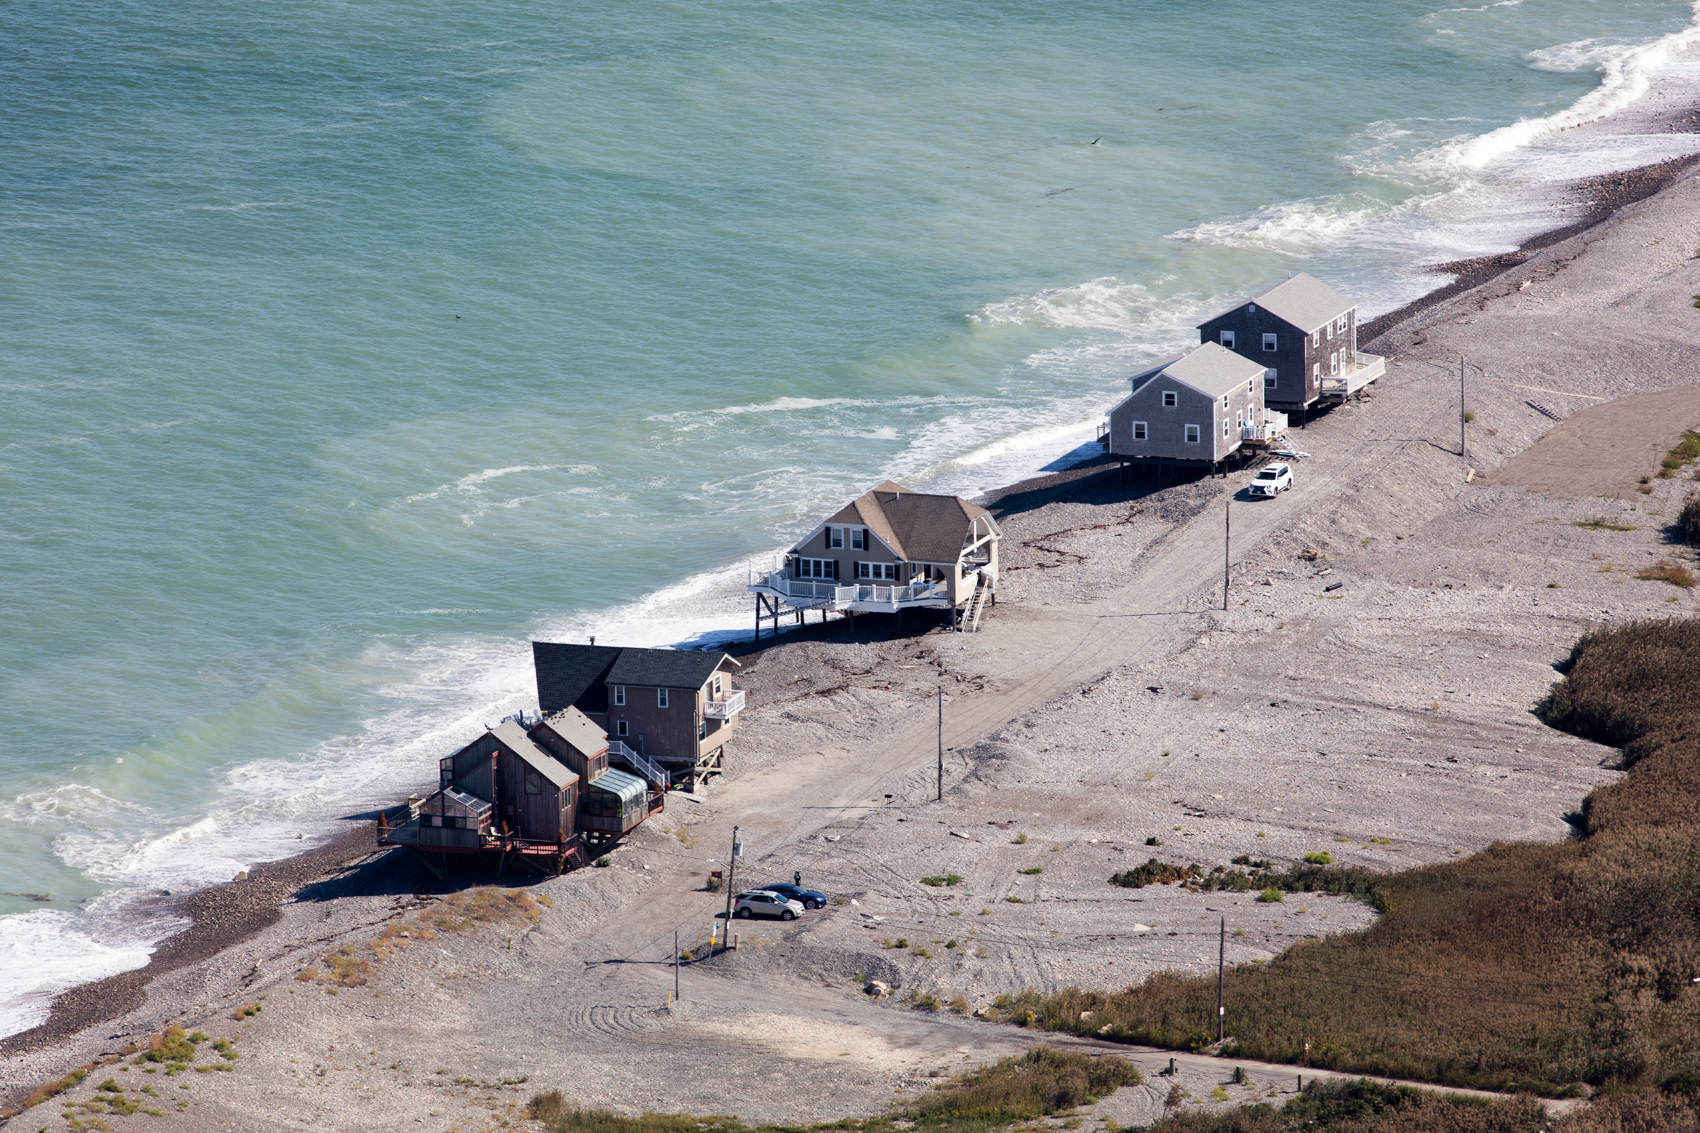 Houses built onto the edge of the beach in Scituate, Massachusetts are at the mercy of storm surge and waves.